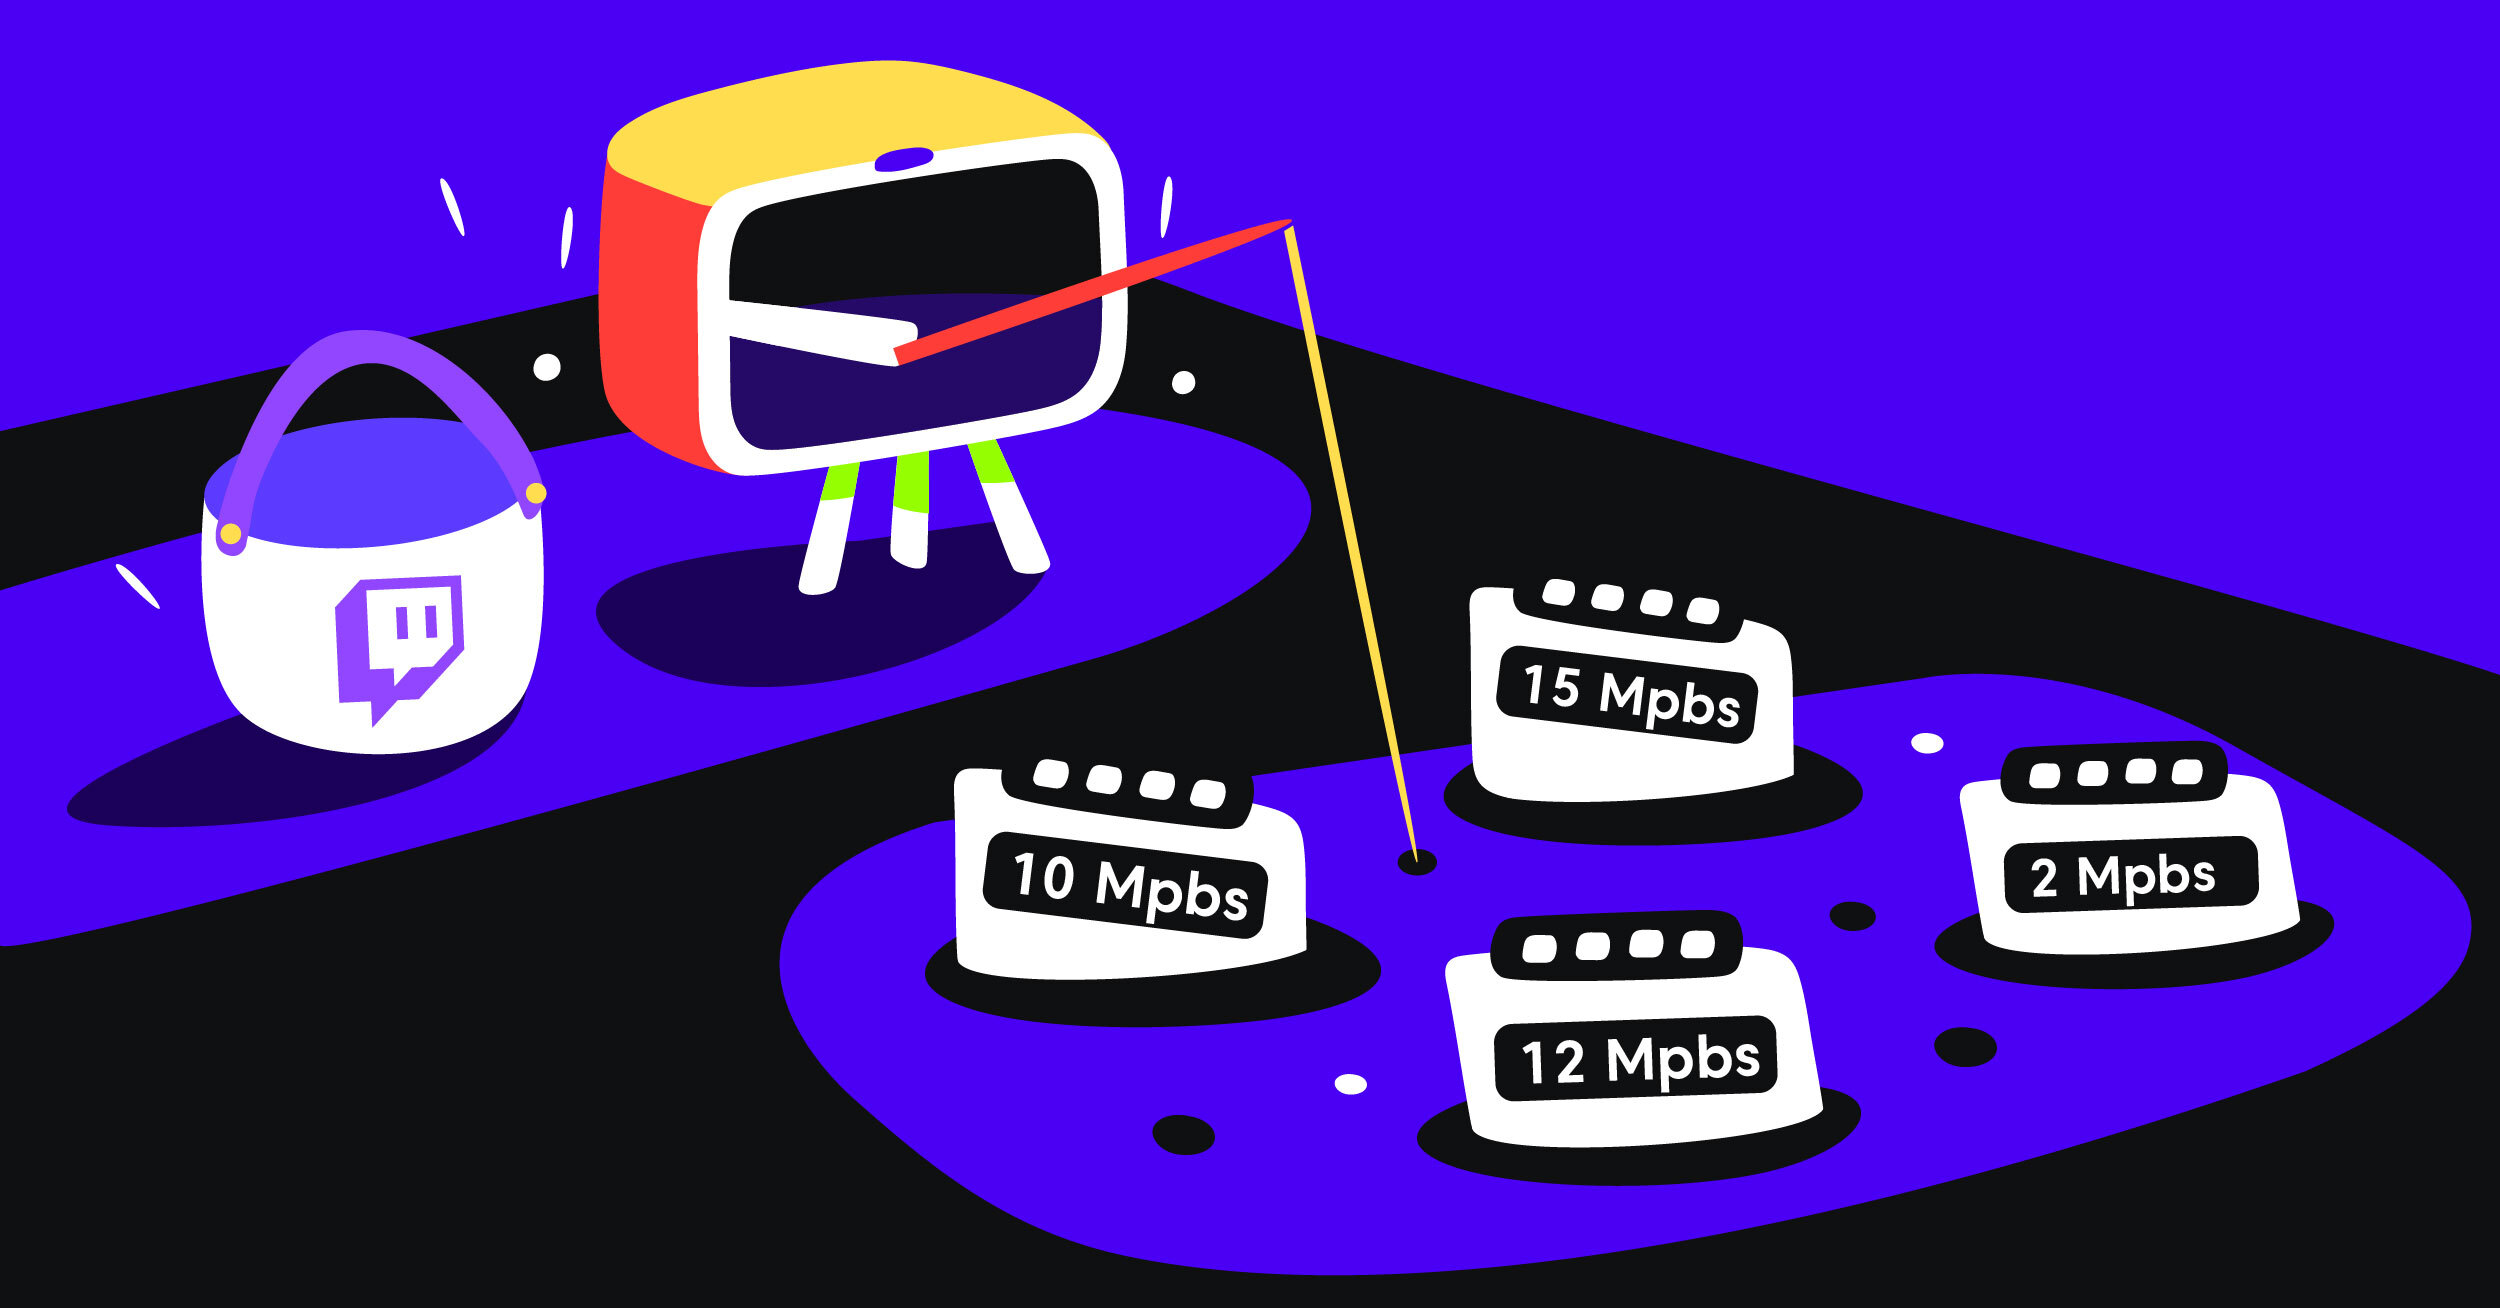 What is the best bitrate for Twitch?